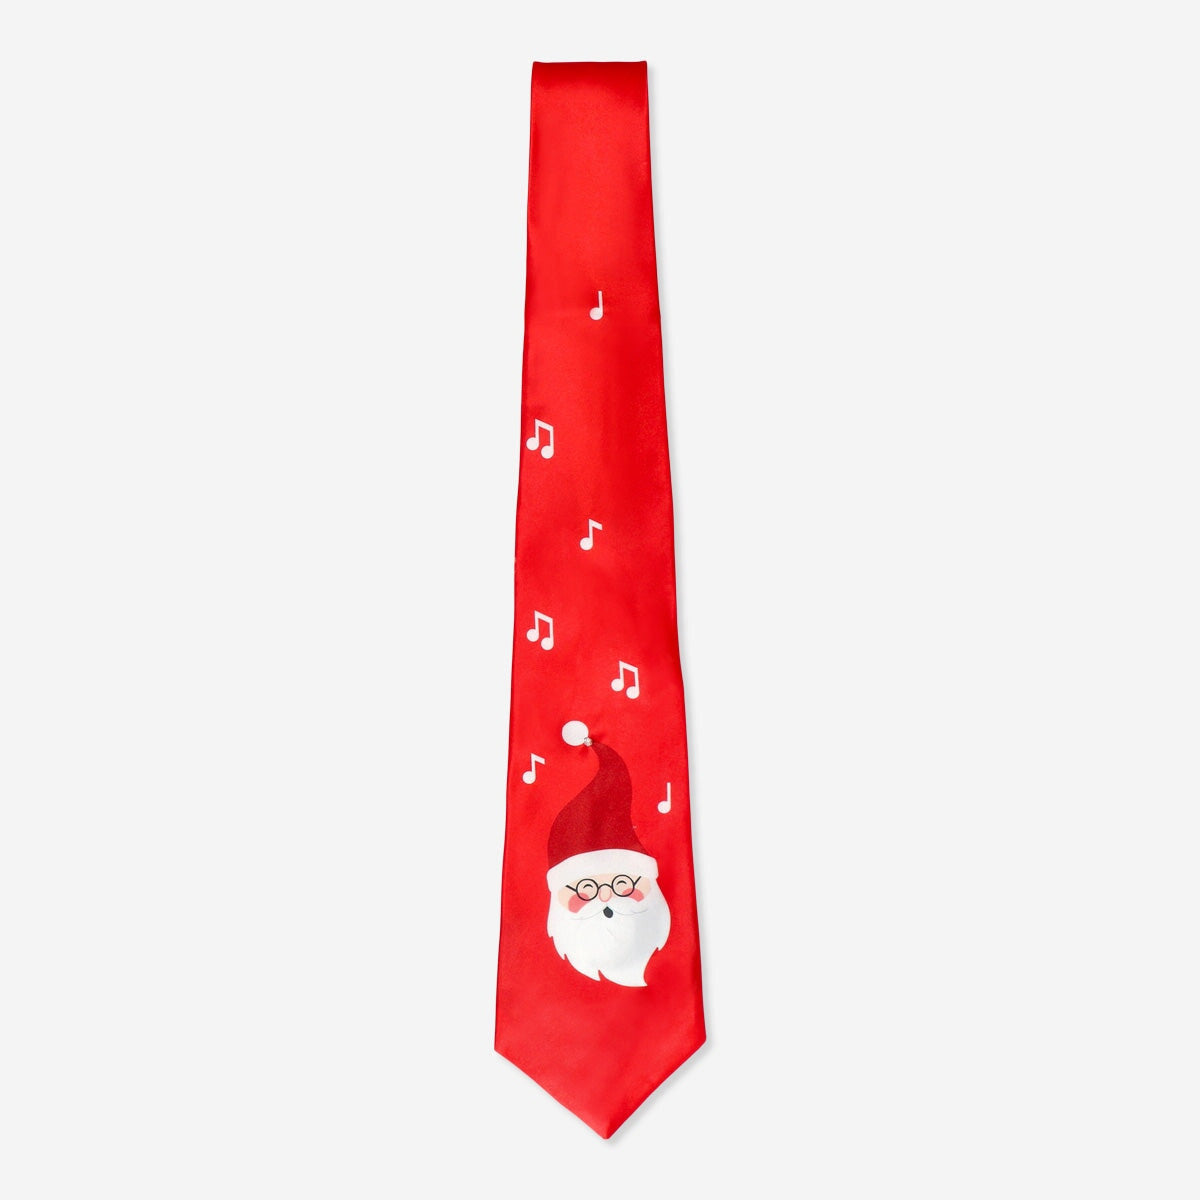 Christmas tie. With lights and music Gadget Flying Tiger Copenhagen 